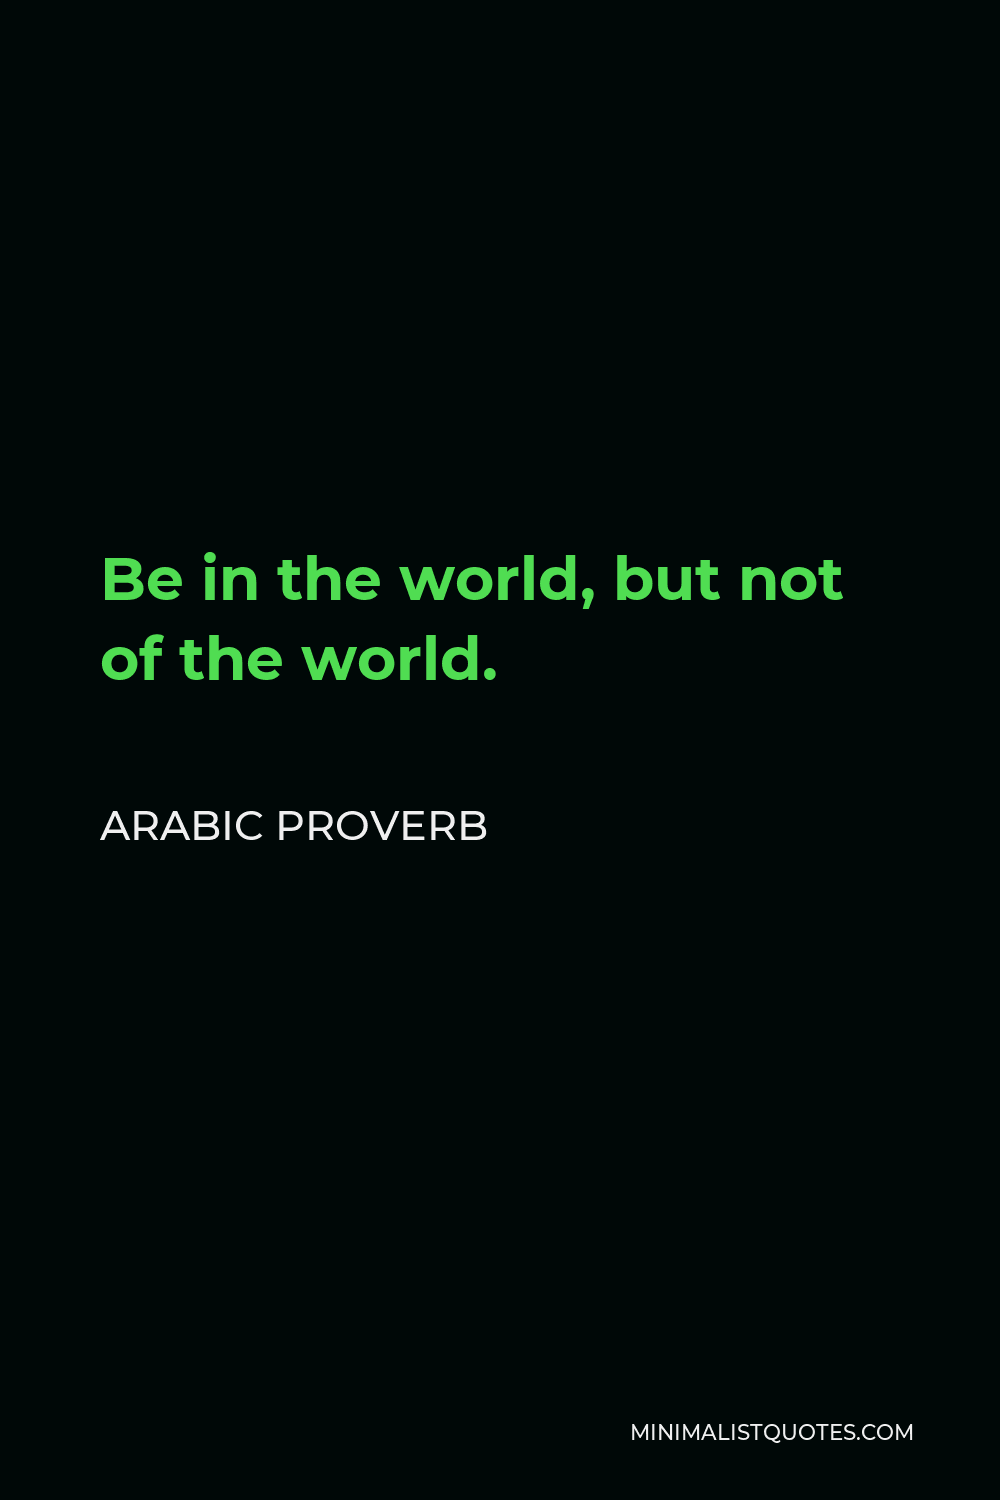 Arabic Proverb Quote - Be in the world, but not of the world.